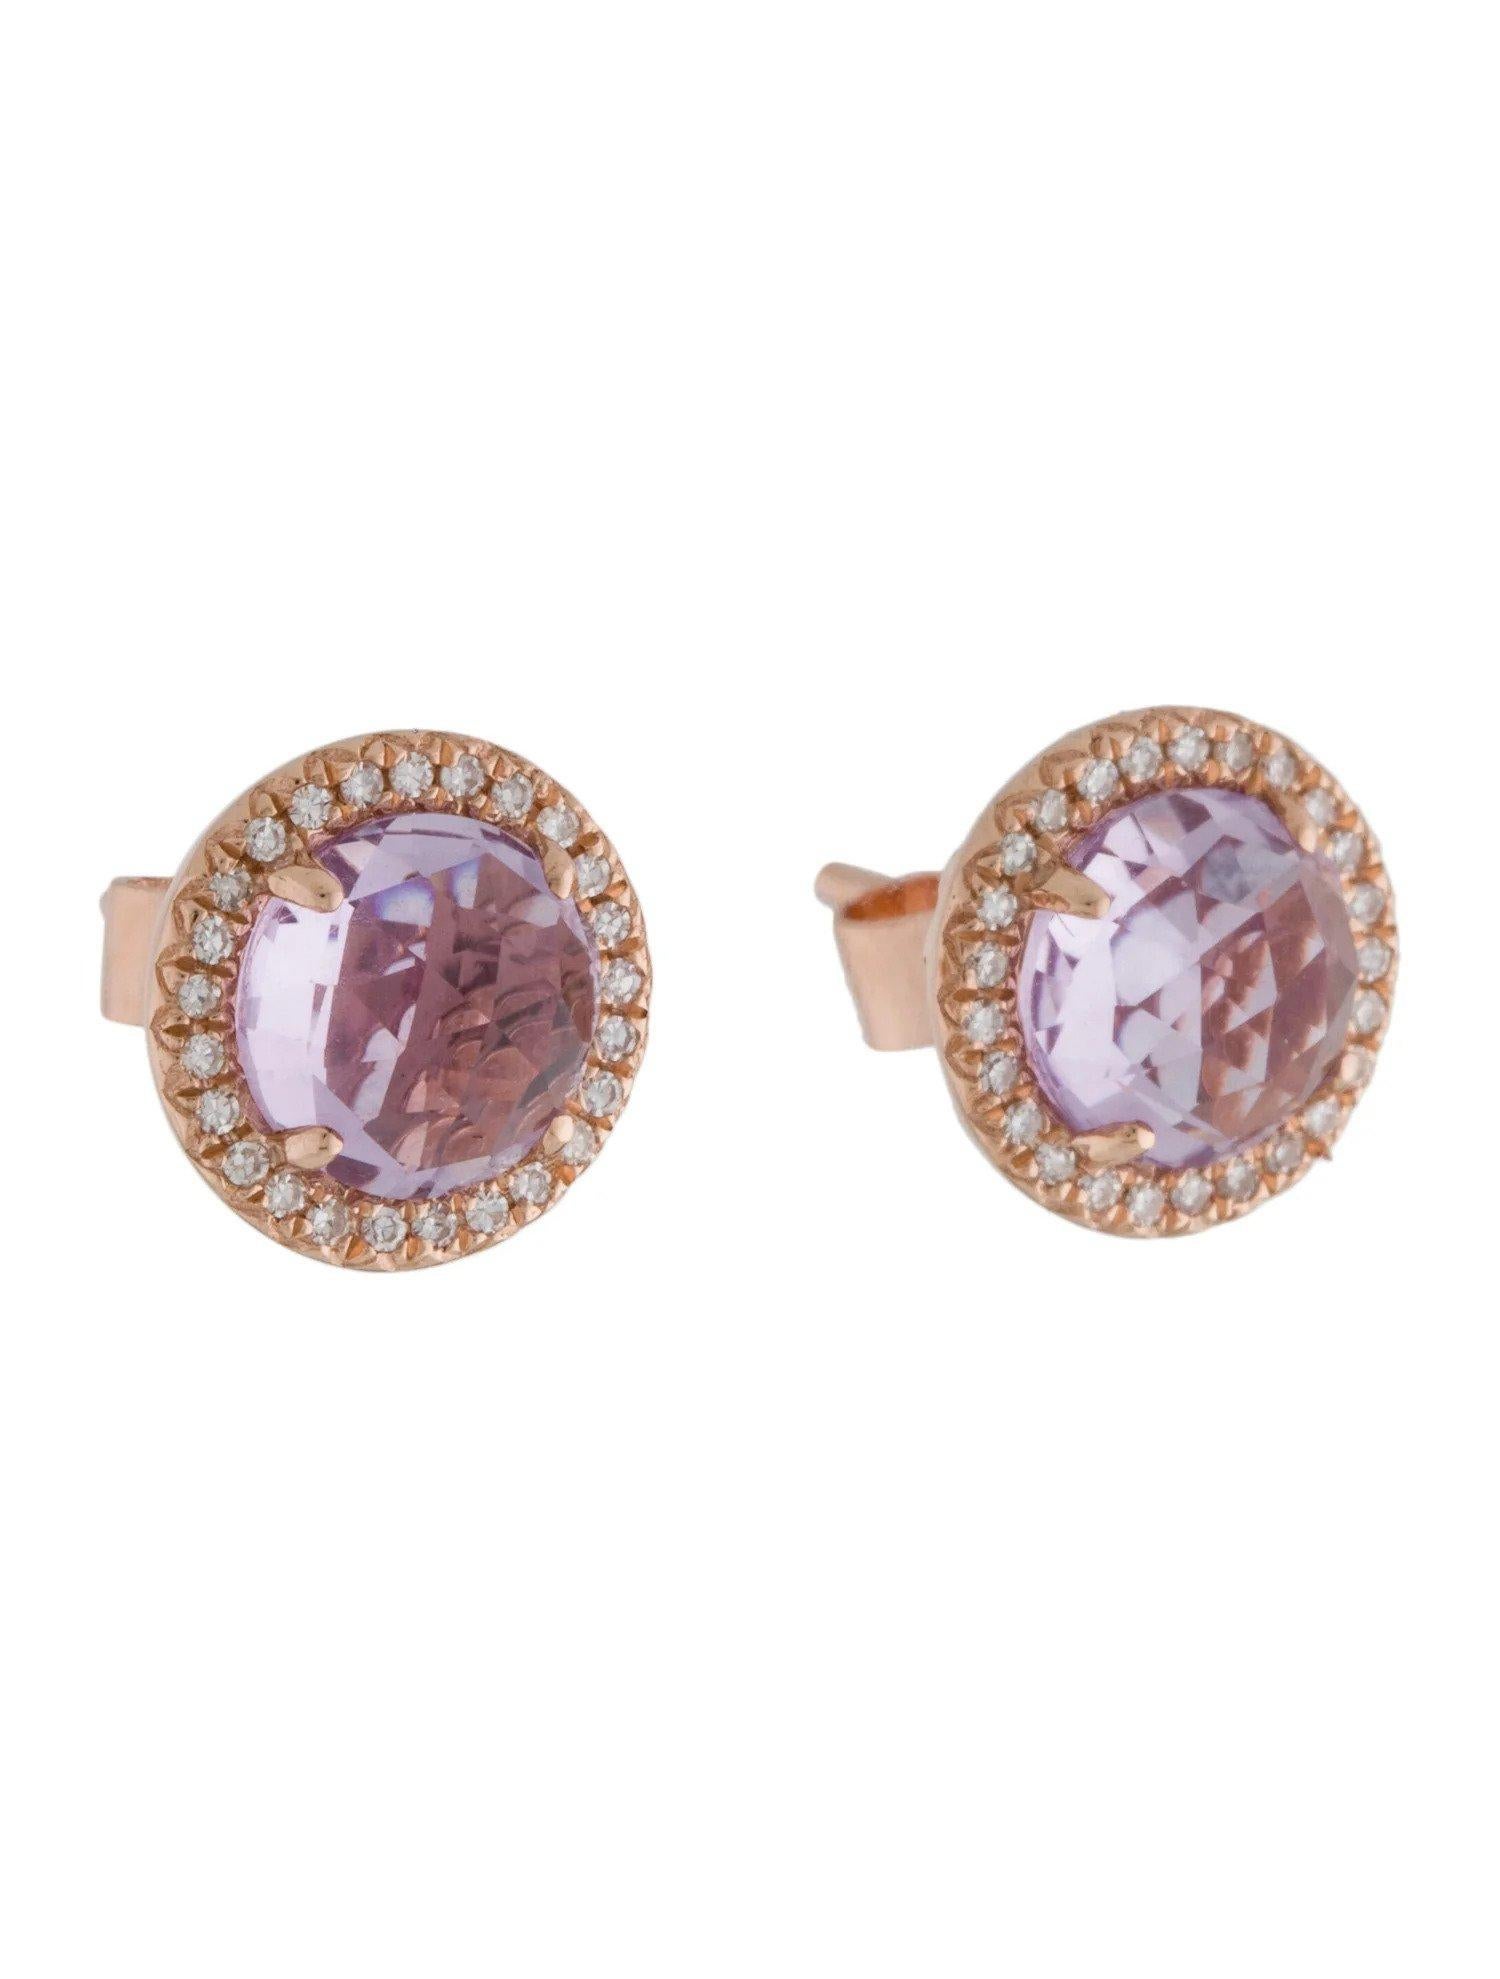 Round Cut 1.86 Carat Round Amethyst & Diamond Rose Gold Stud Earrings For Sale